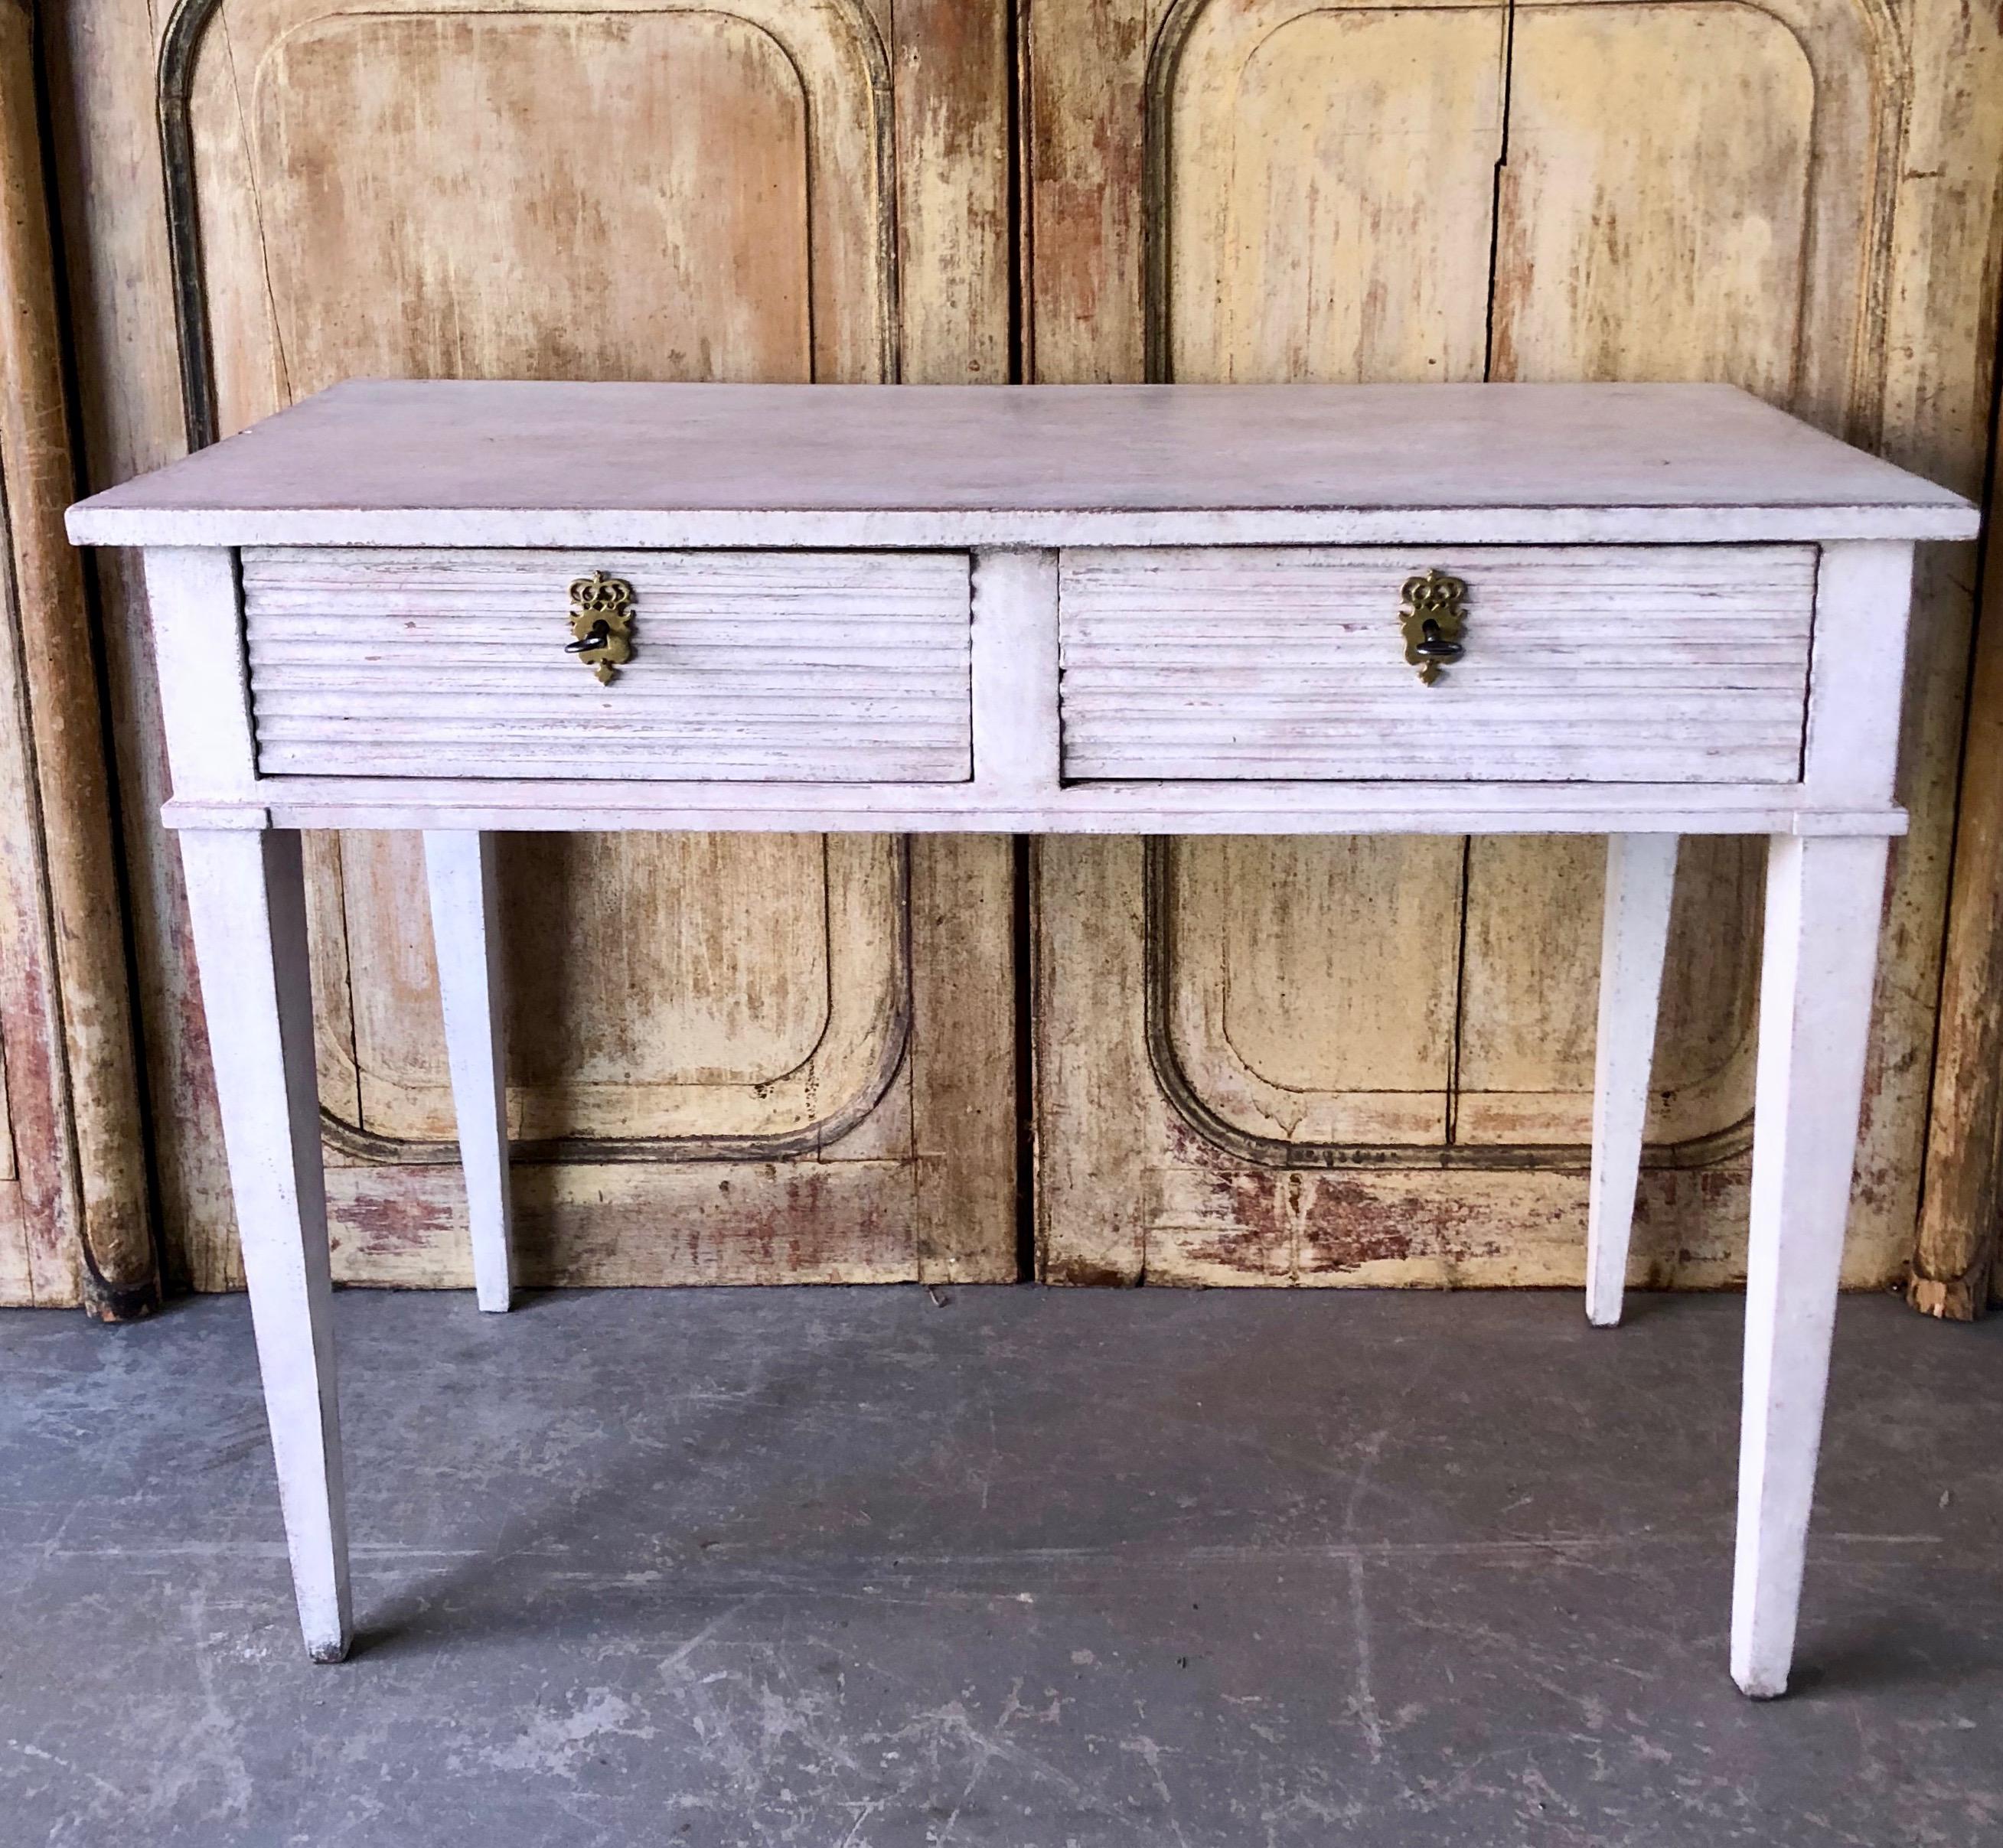 19th century Swedish late Gustavian writing table/side table with two apron drawers with vertical reedings on tapering square legs.
Sweden, circa 1850.